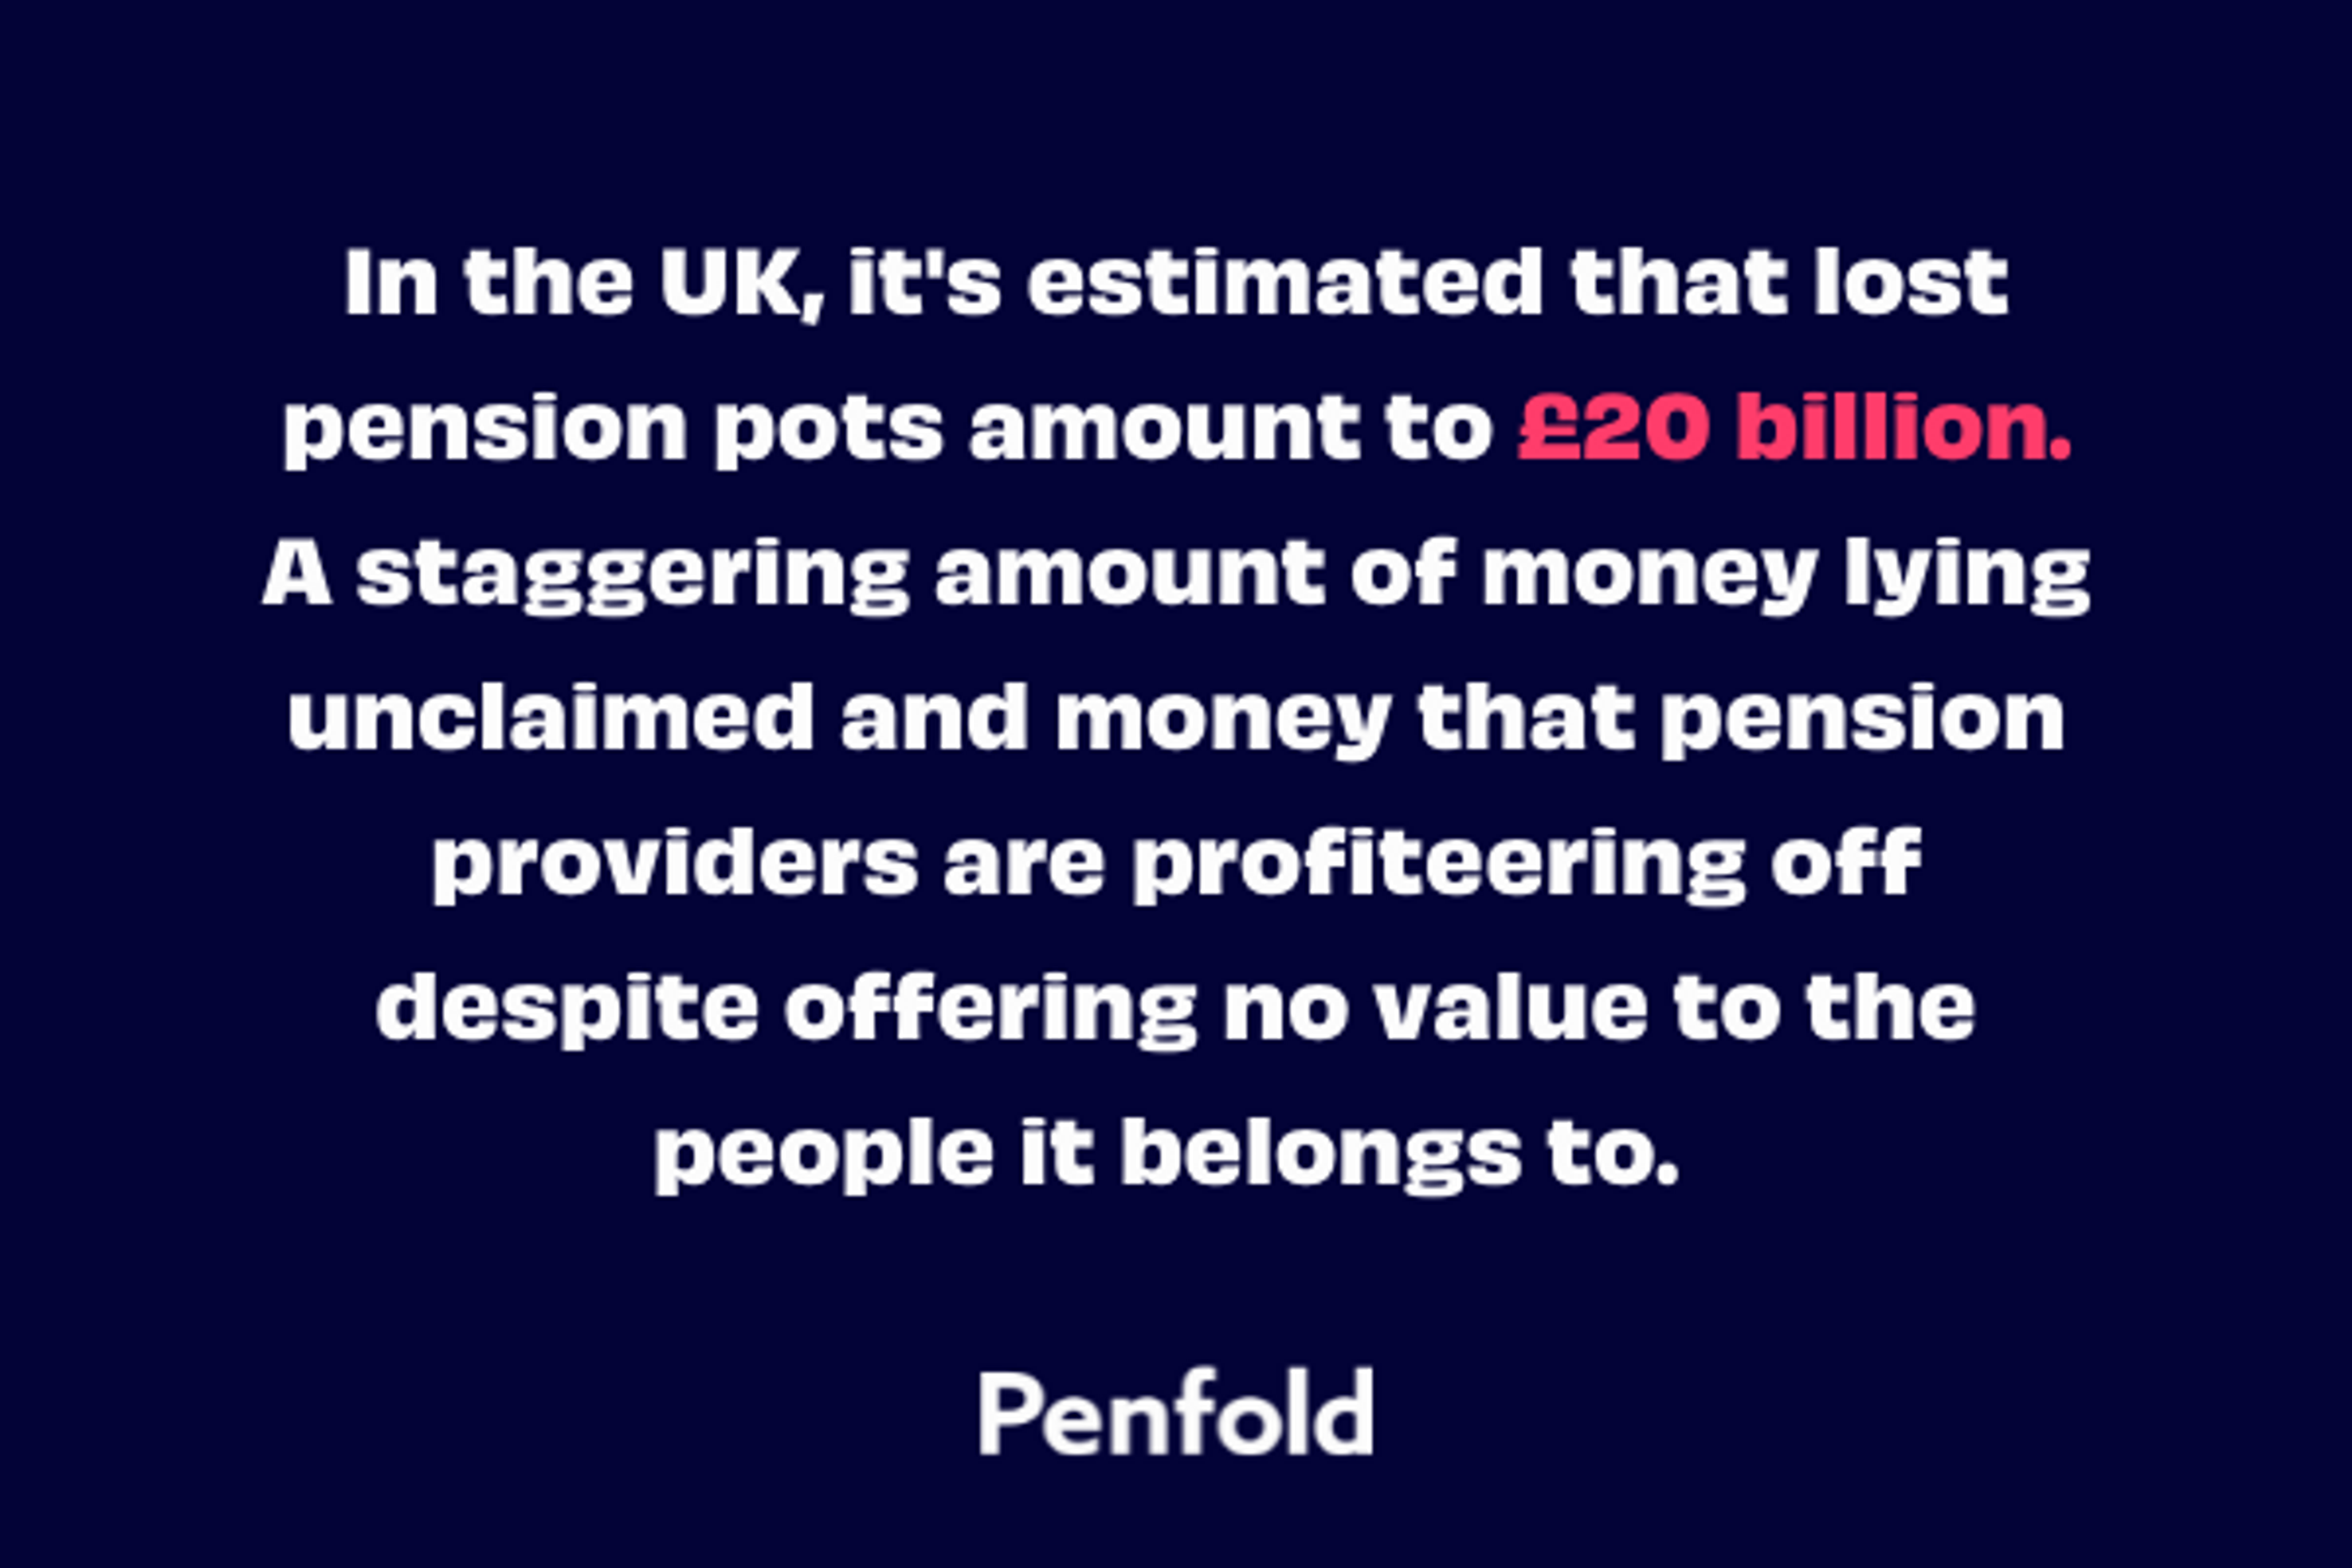 Quote stating 'In the UK, it's estimated that lost pension pots amount to £20 billion.'